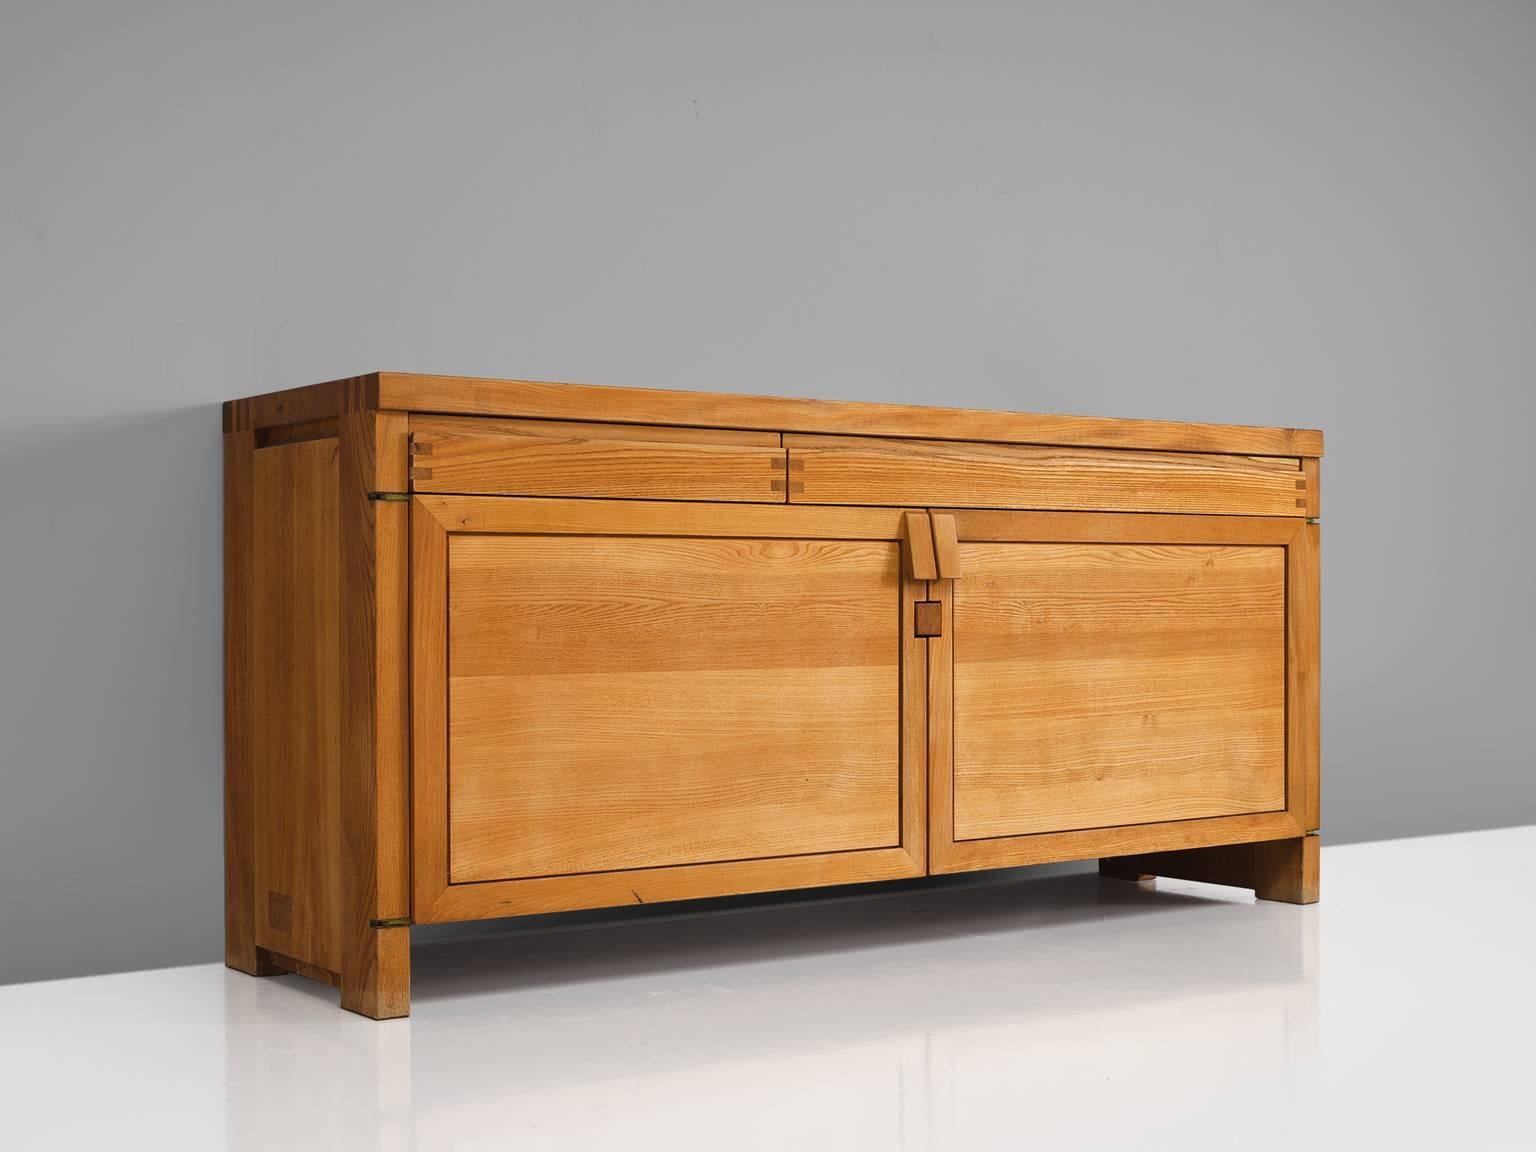 Pierre Chapo, sideboard, two-door long sideboard model R08, elm, France, 1964.

This exquisitely crafted credenza combines a simplified yet complex design combined with nifty, solid construction details that characterize Chapo's work. The well